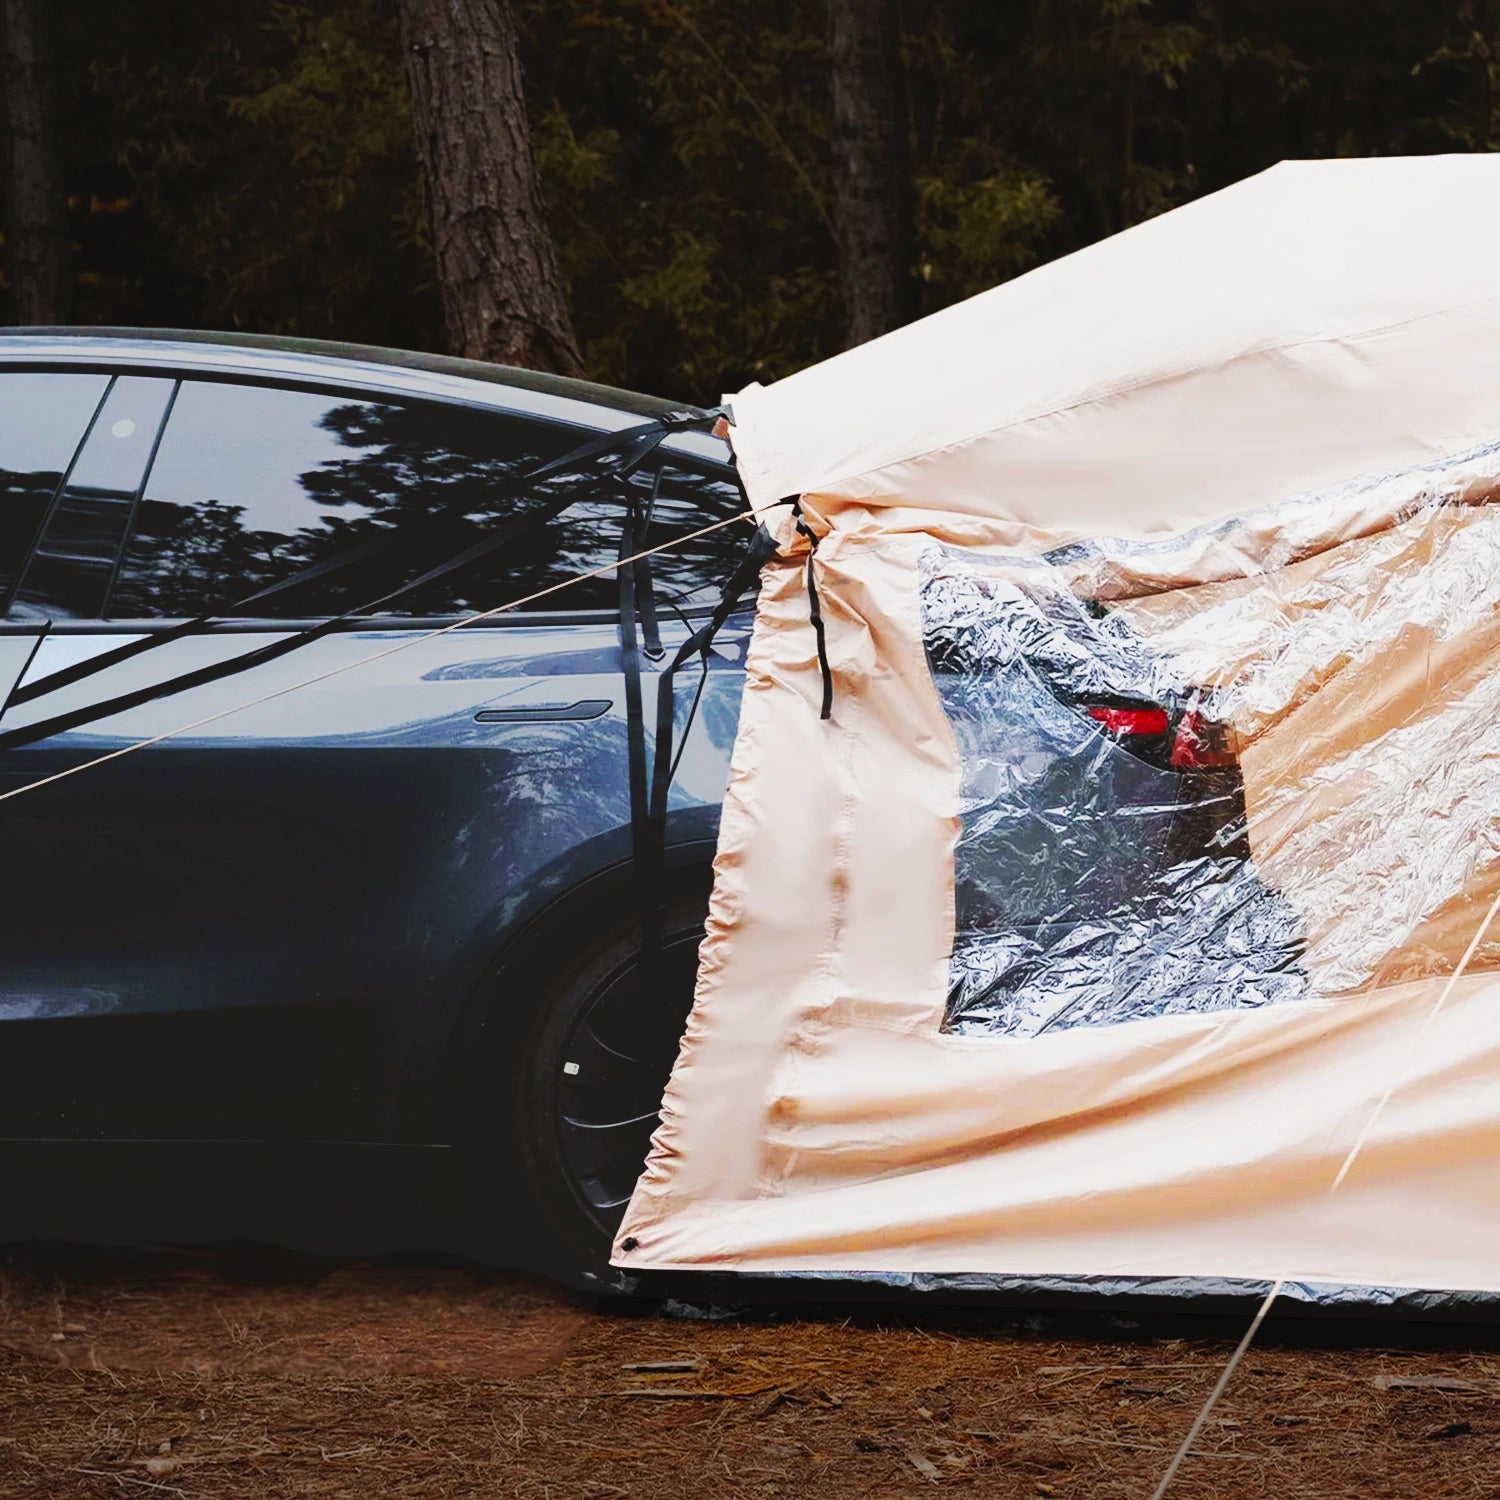 Adreama Tesla Model Y Camping Tent (Ships Within 5-7 Days)